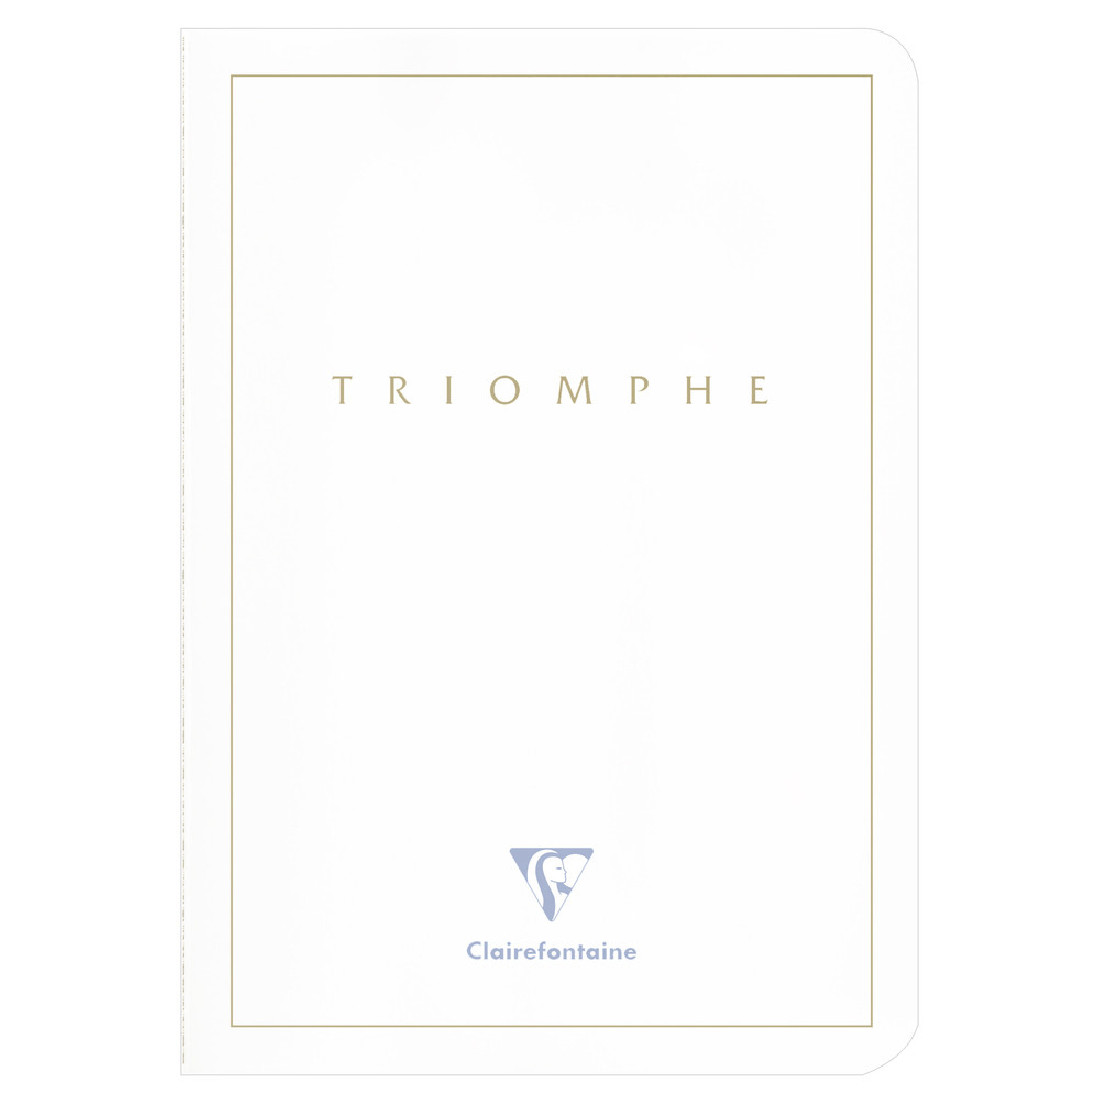 Clairefontaine Rhodia 36126C Triomphe Gold Collection  White Sewn Notebook - A5 21x14,8 cm - 96 Lined White Pages - 90 g Paper - Card Cover with Gold Marking